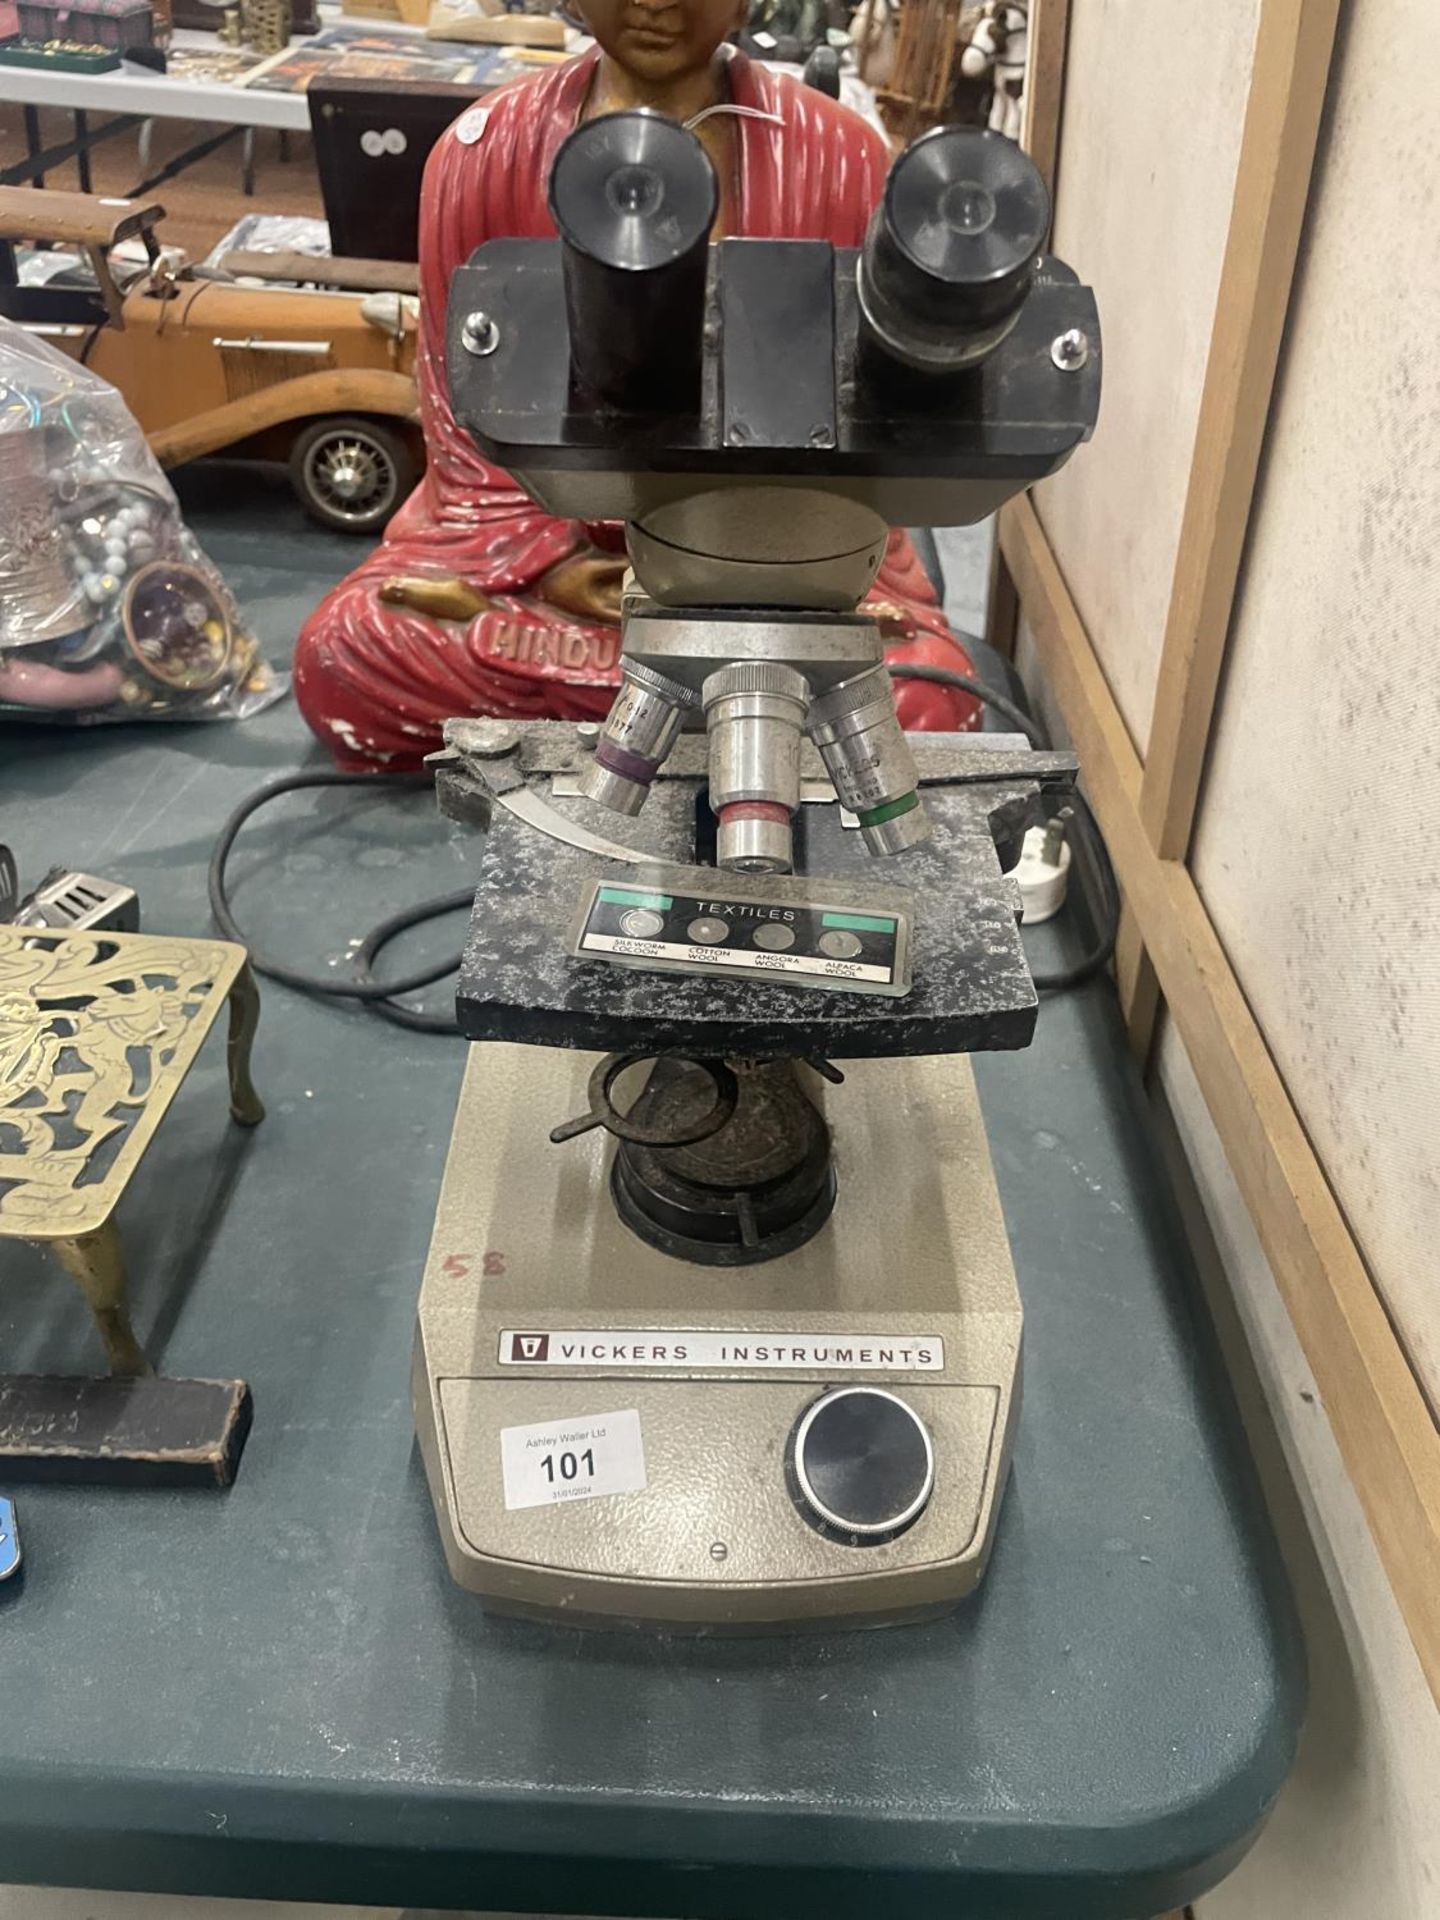 A VICKERS INSTRUMENTS VINTAGE MICROSCOPE WITH A TEXTILES SLIDE - Image 3 of 3